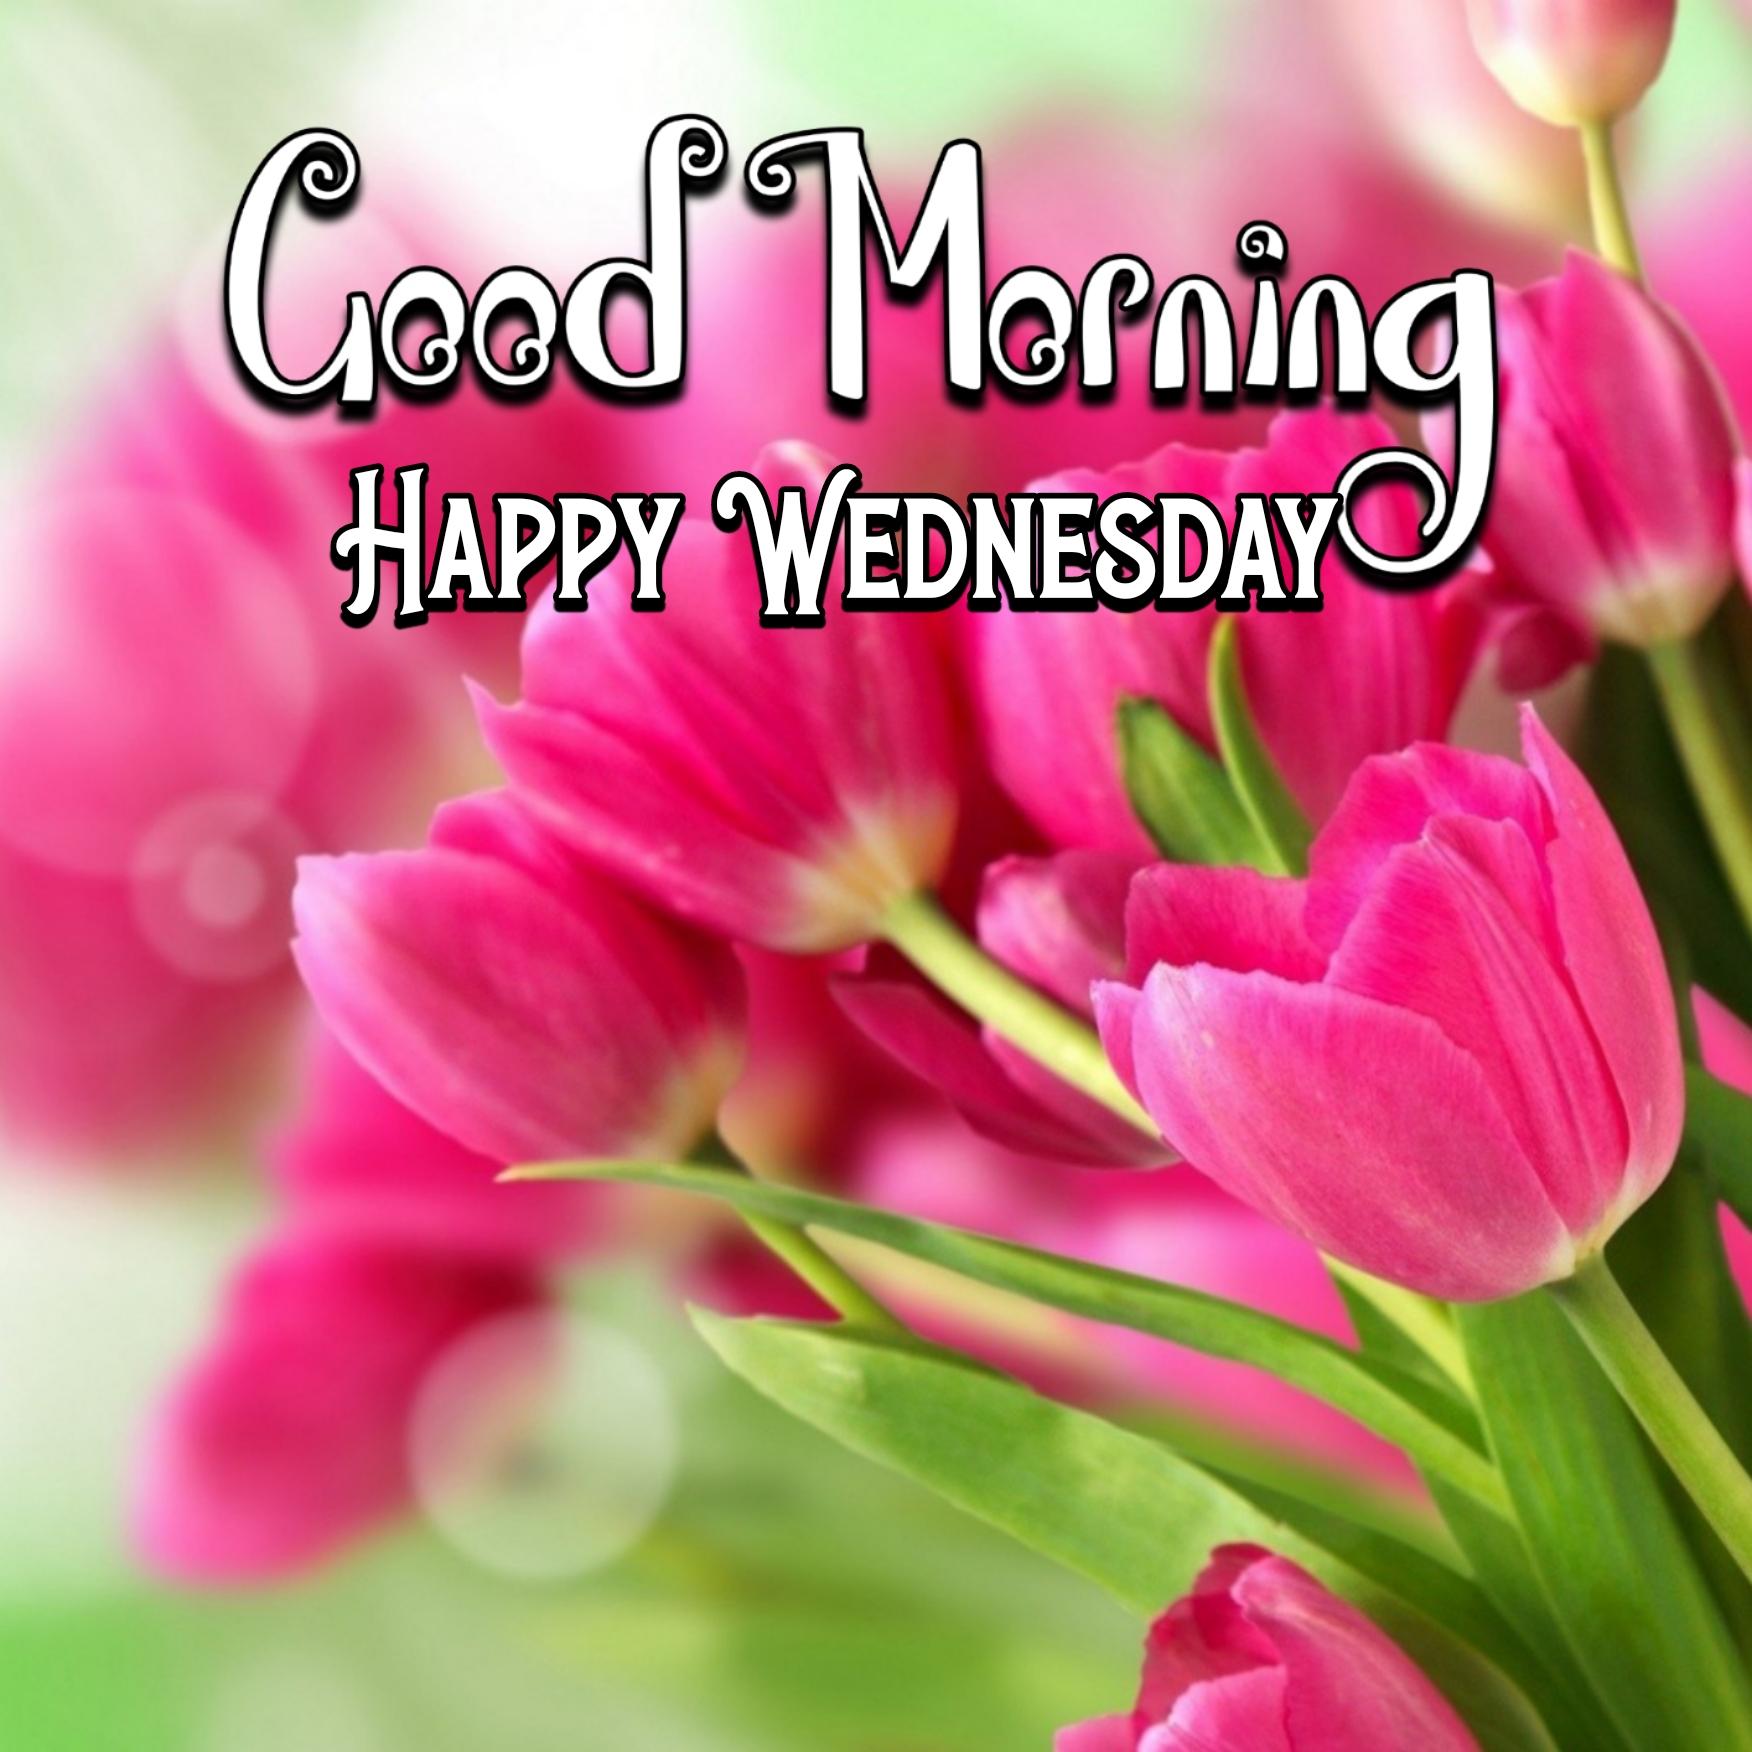 Good Morning Images Wednesday